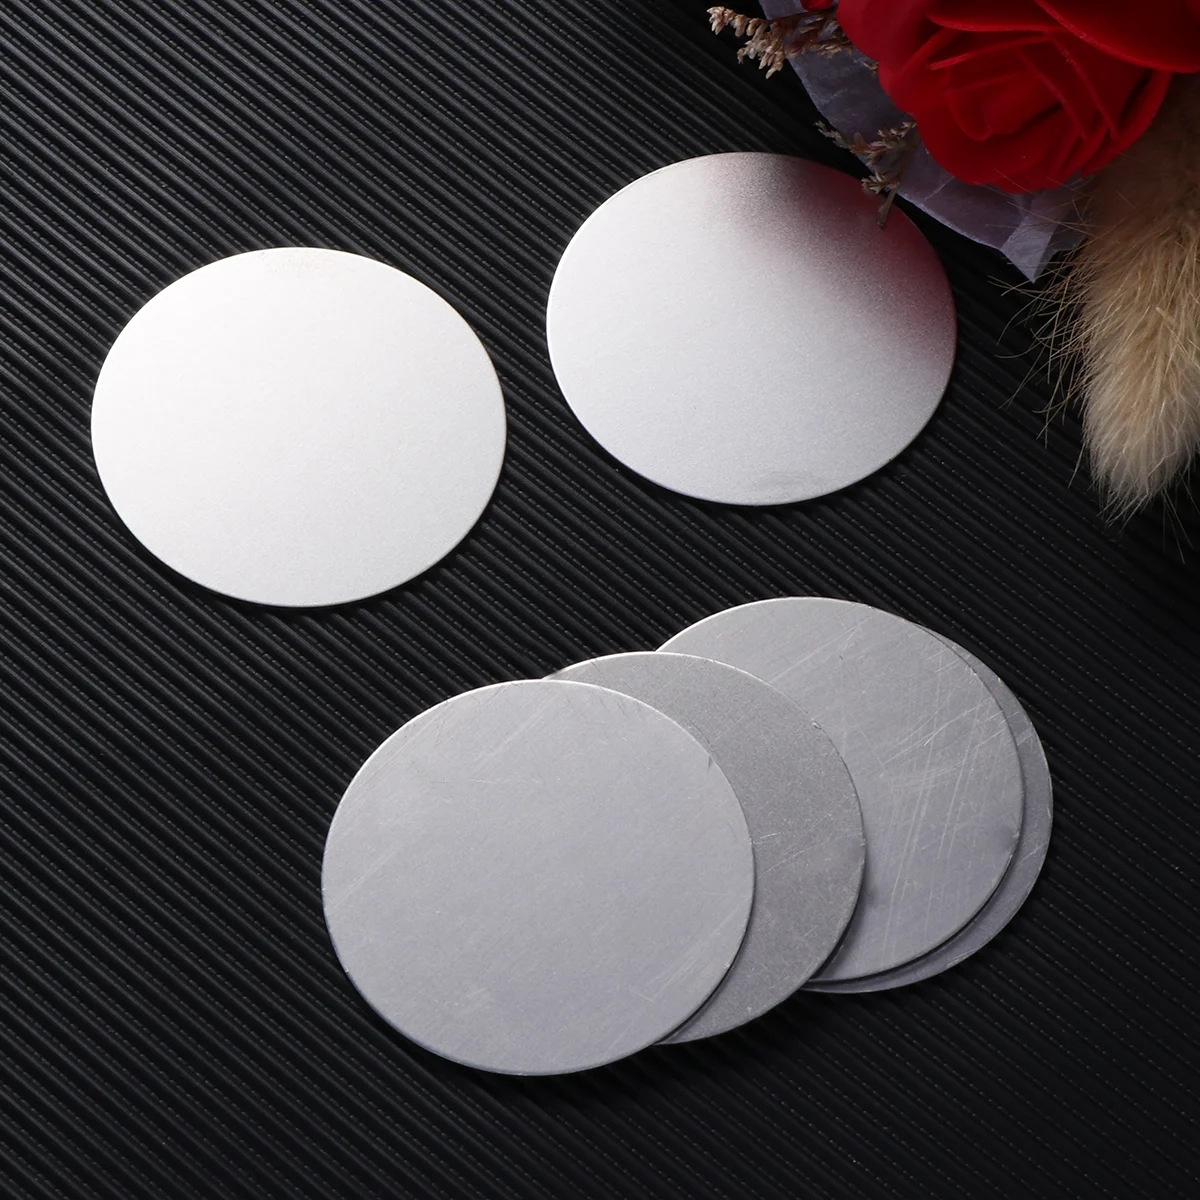 10 Pcs Vehicle Mount Stickers Round Metal Plate Phone Metal Plate Metal Phone Plate Magnetic Sticker